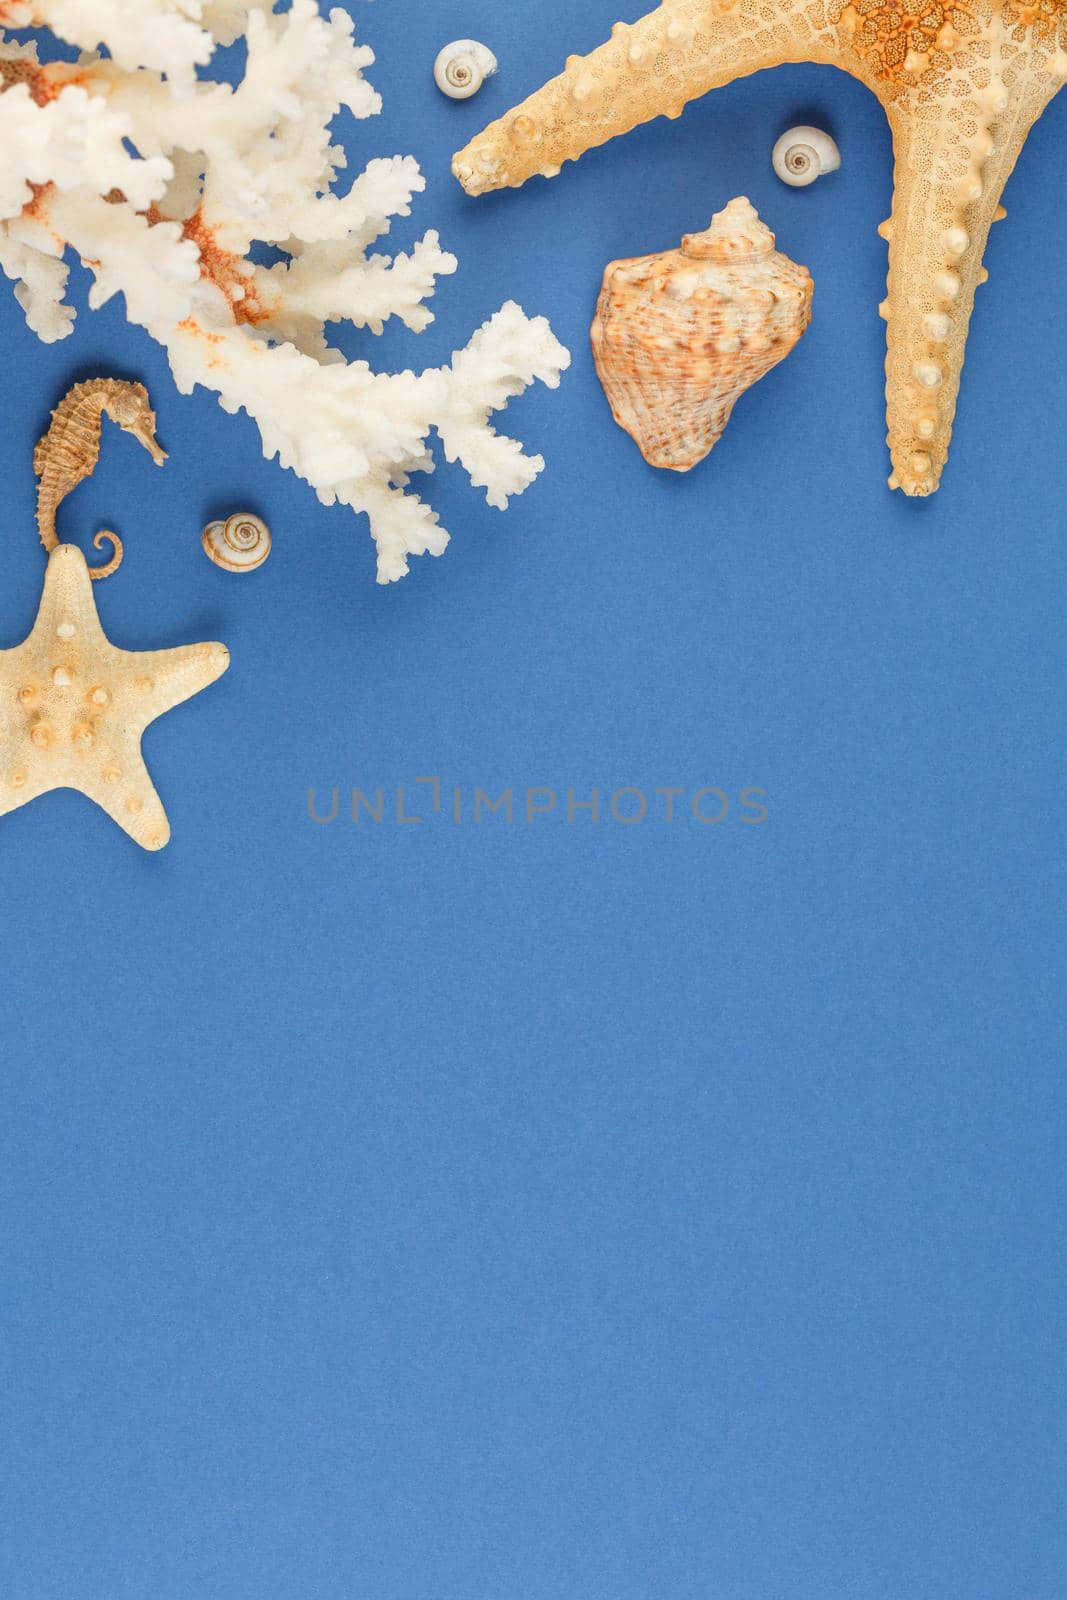 Seashells of sea molluscs with starfish on blue background. Photo top view with copyspace. Concept of a beach holiday on the coast. Flat lay.